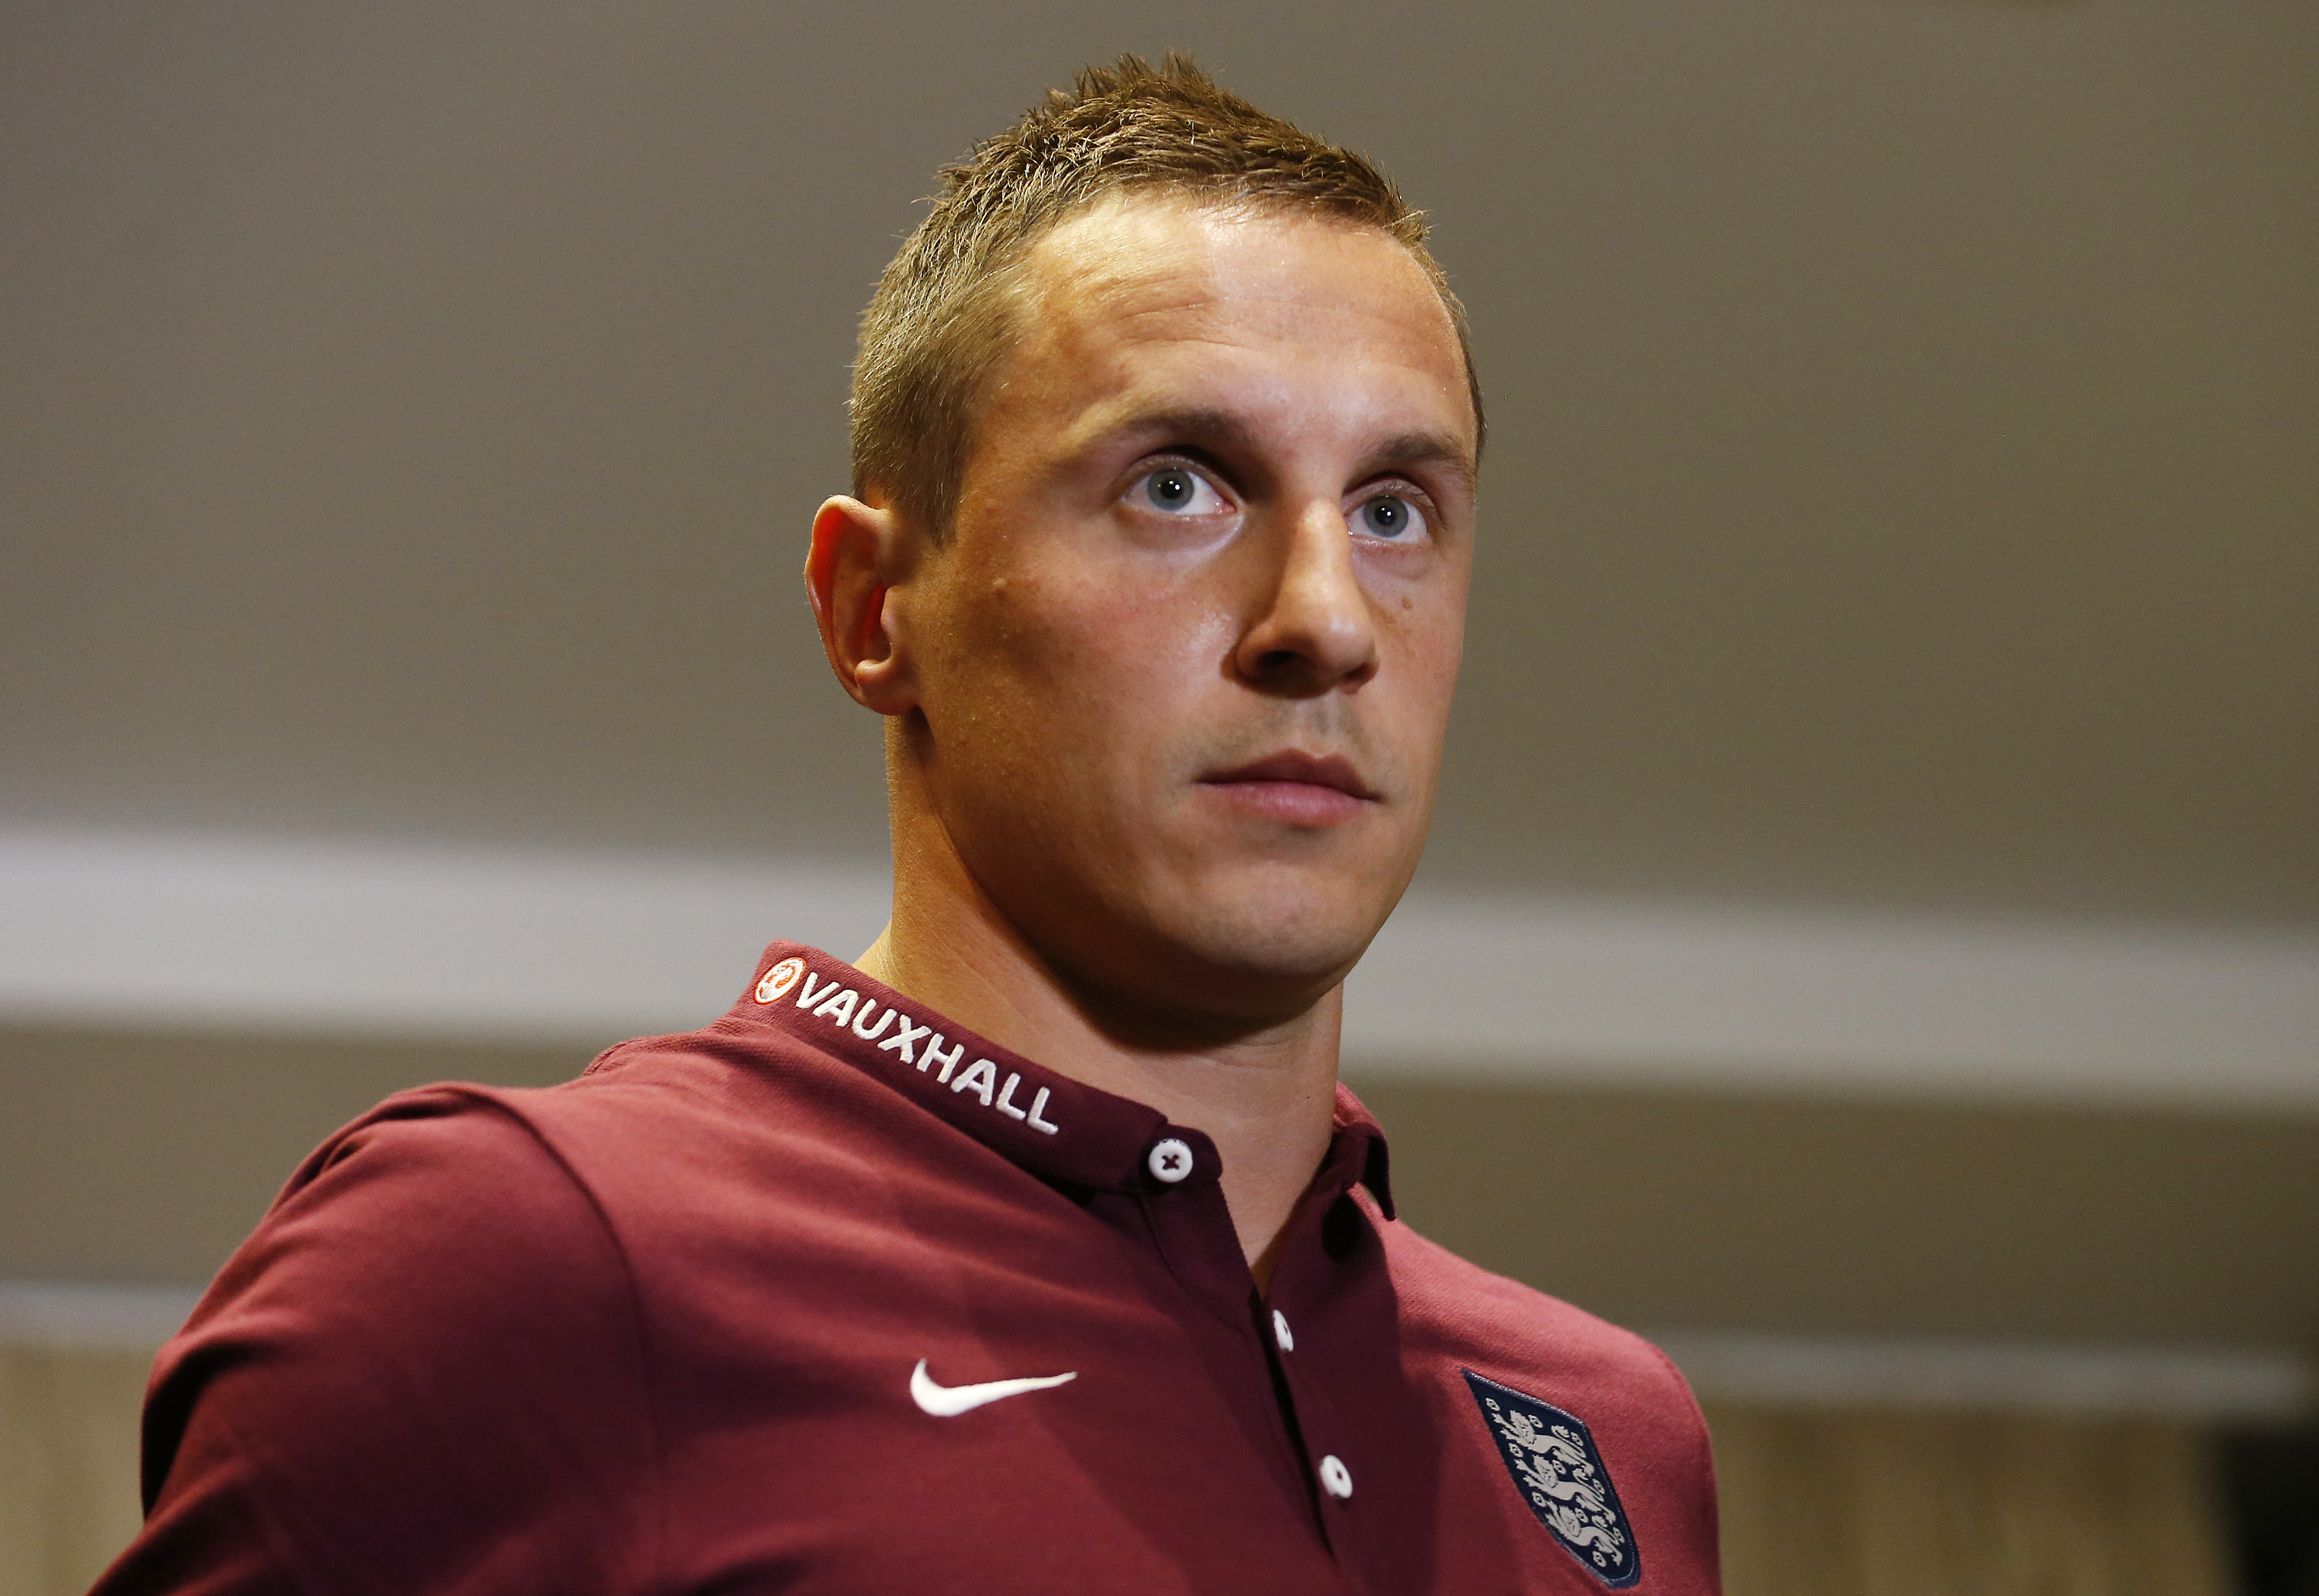 Football - England Press Conference - Novotel Hotel, Vilnius, Lithuania - 11/10/15nEngland's Phil Jagielka during the press conferencenAction Images via Reuters / Carl RecinenLivepicnEDITORIAL USE ONLY.